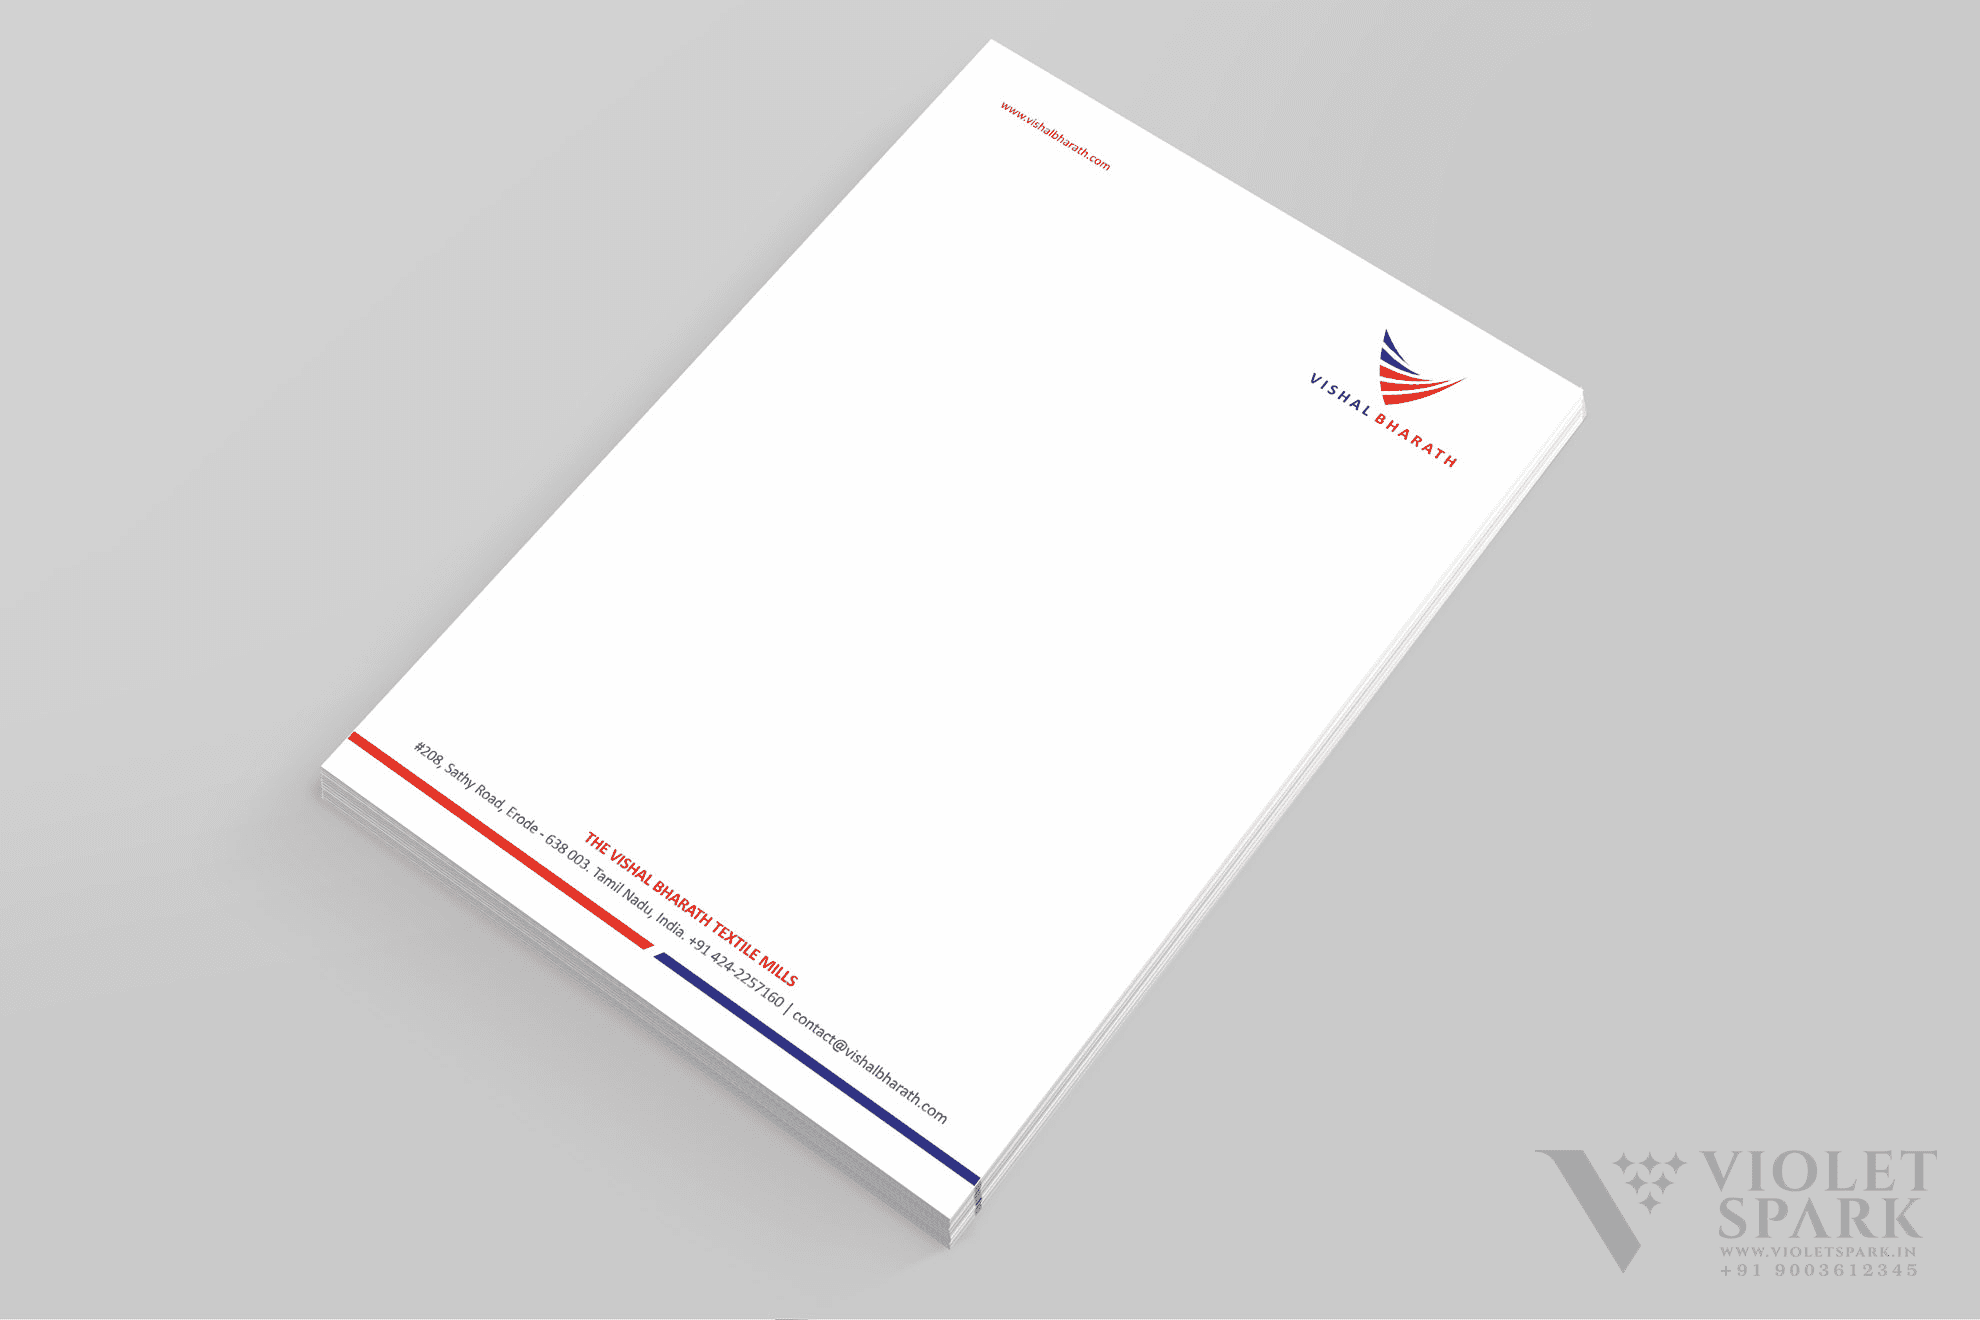 The Vishal Bharath Textile Mills Letter Head Branding & Packaging Design in Coimbatore by Creative Prints thecreativeprints